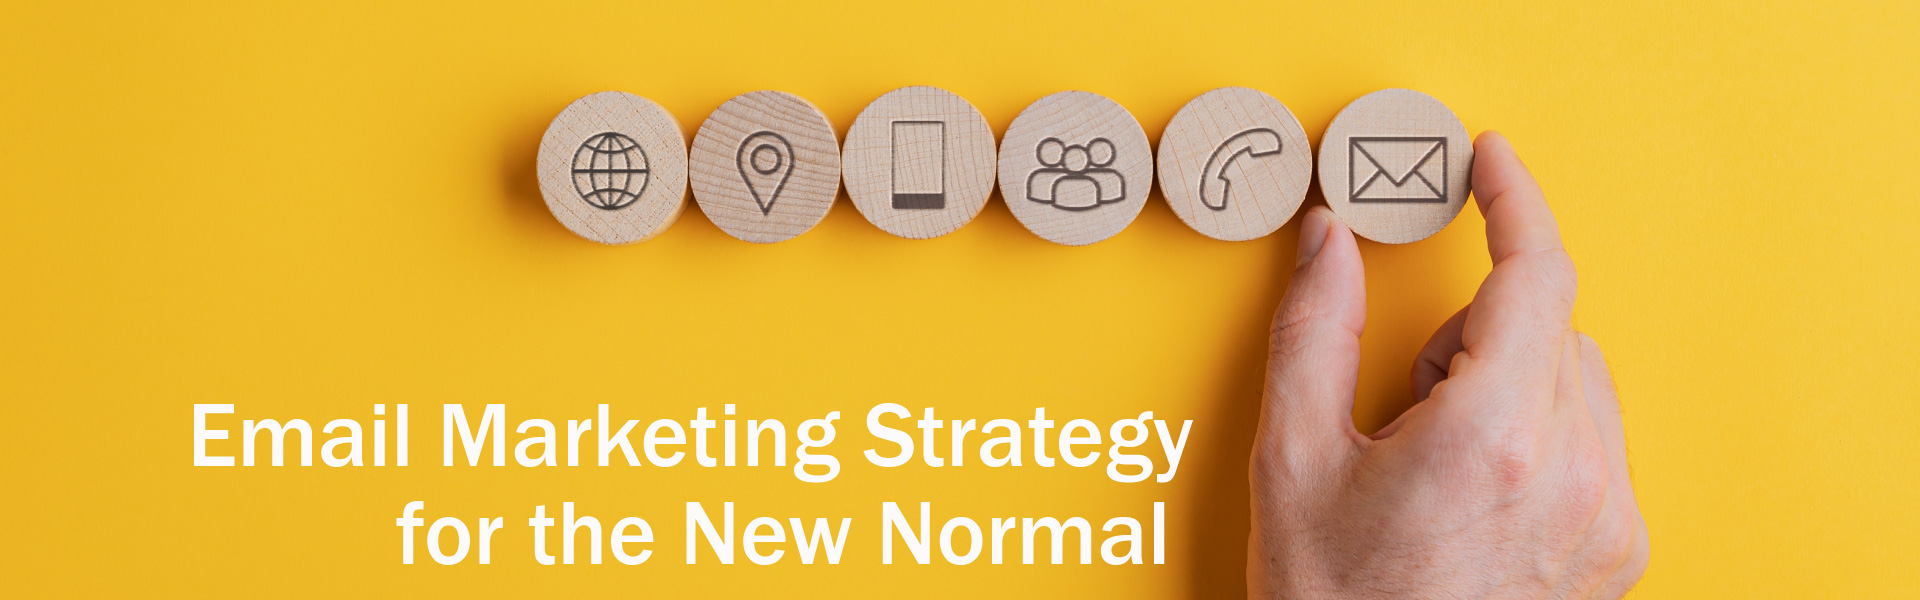 Email Marketing Strategy for the New Normal